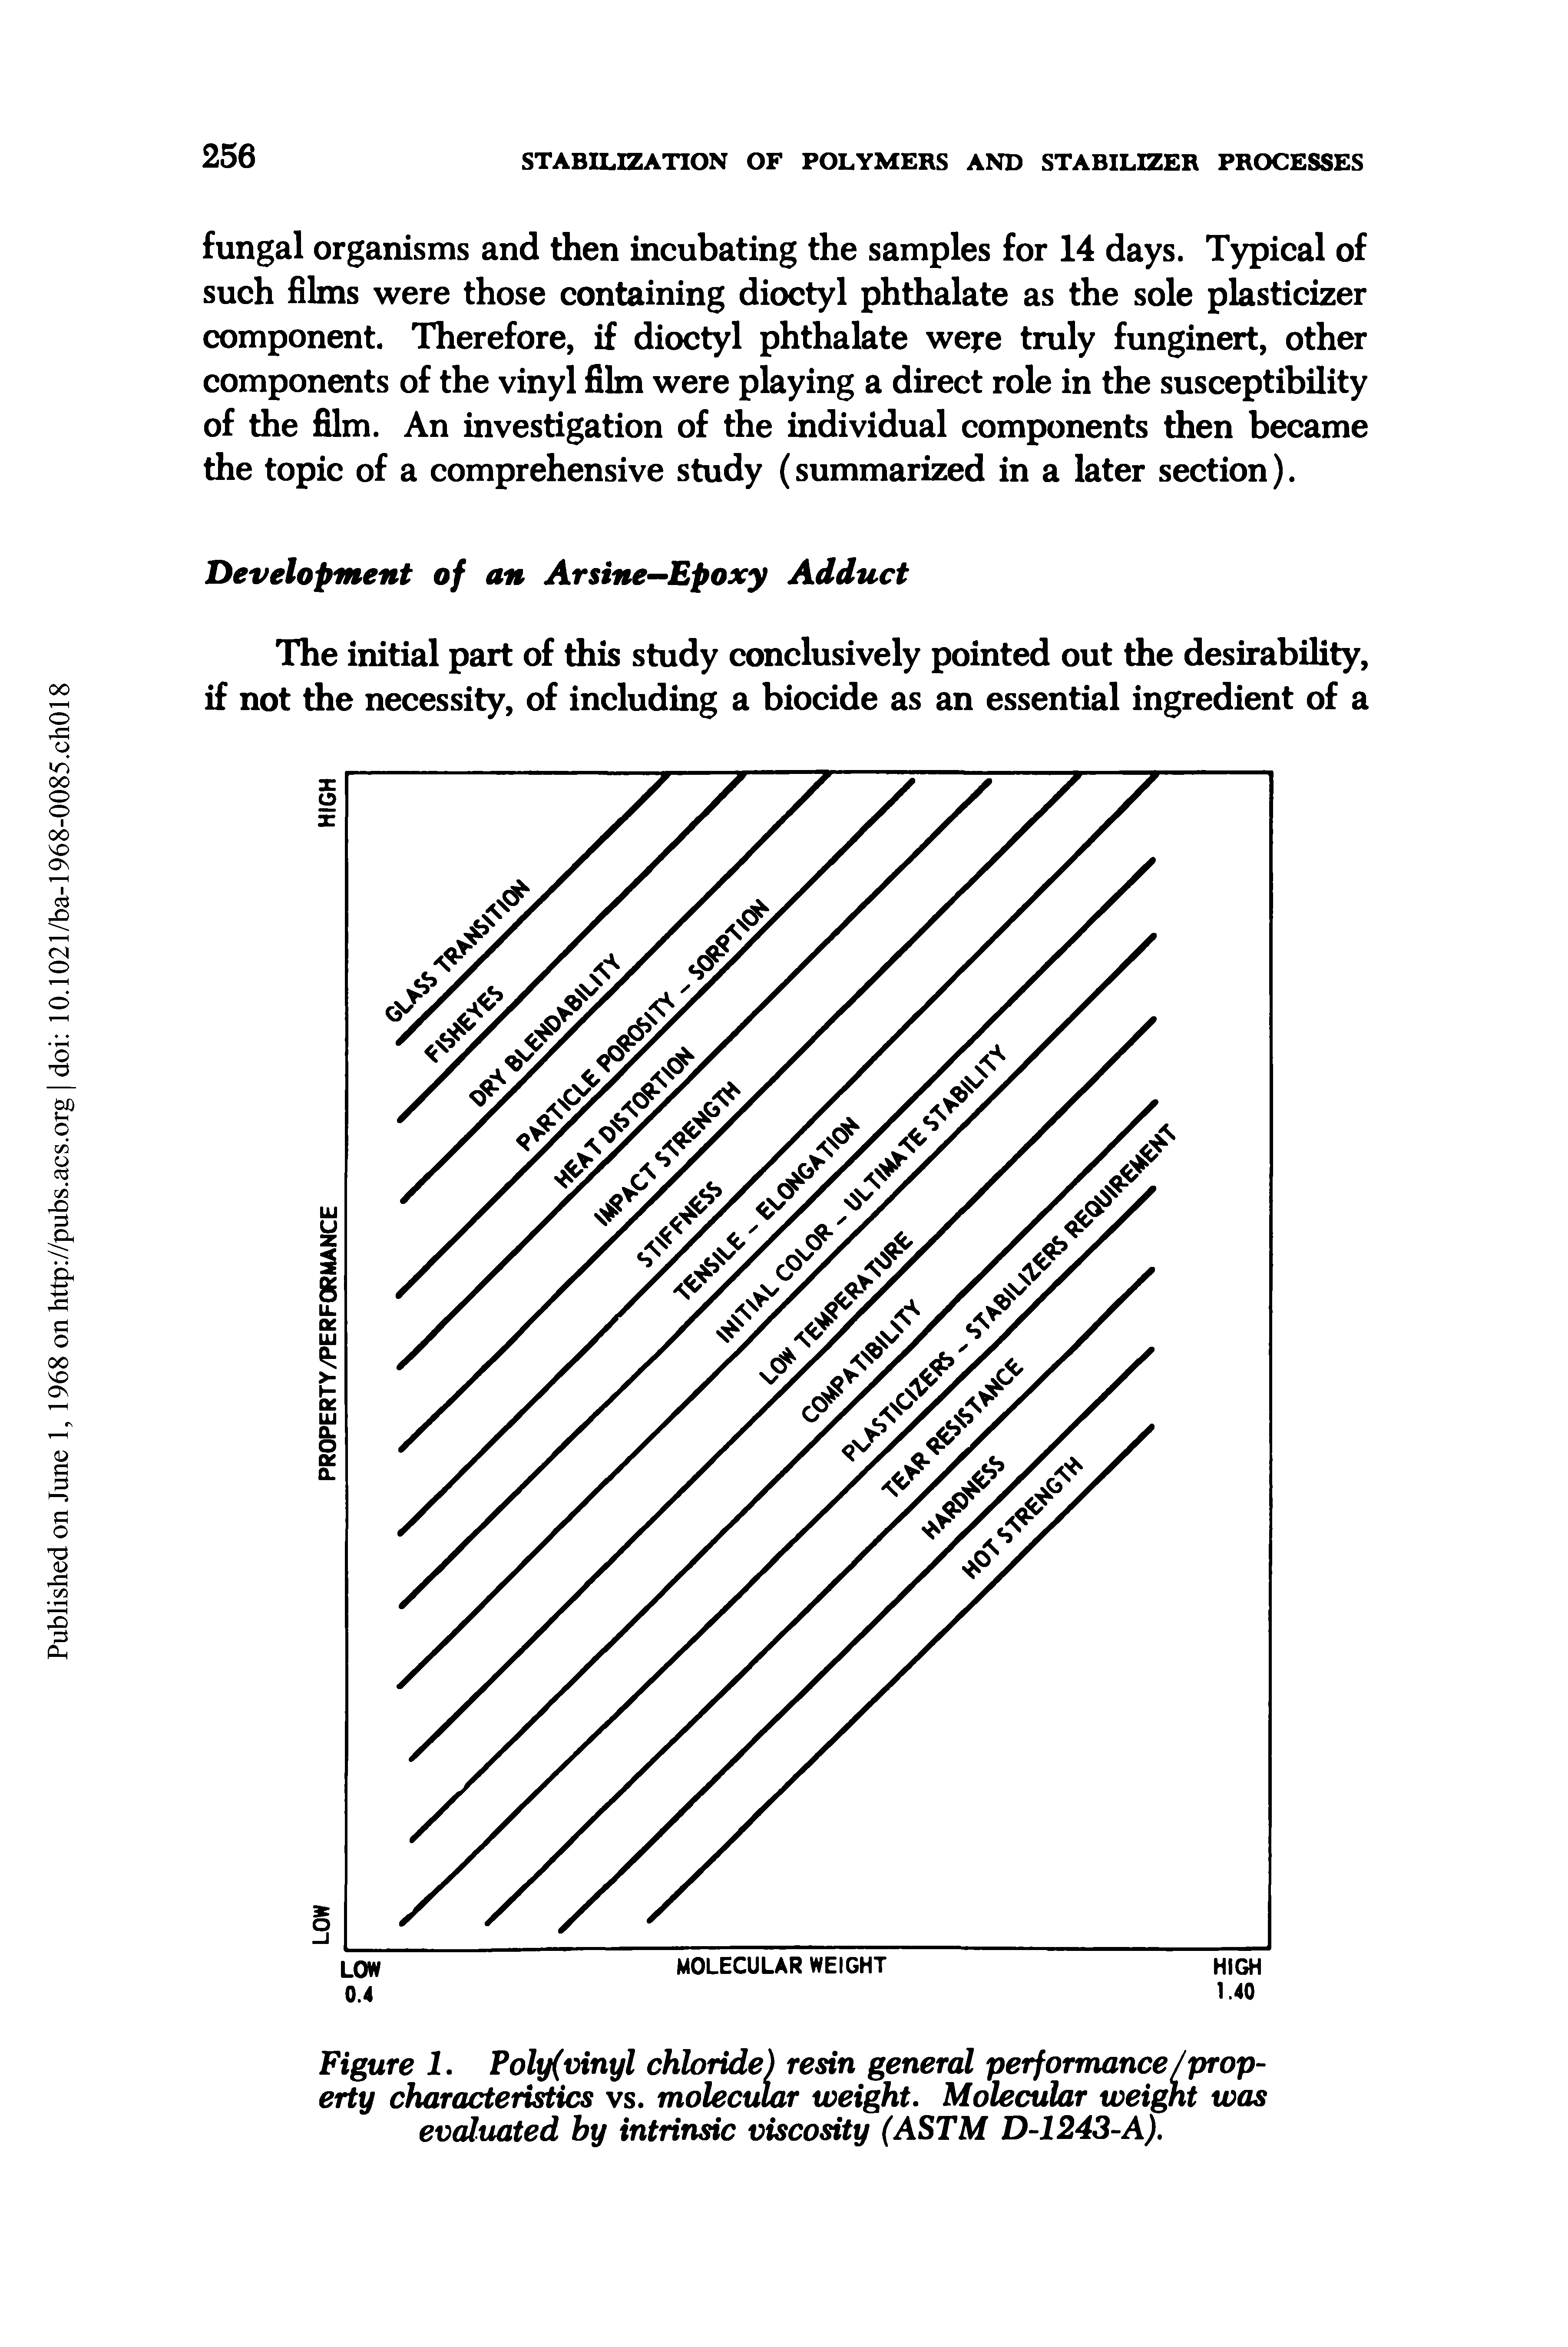 Figure I. Poly(vinyl chloride) resin general performance /property characteristics vs. molecular weight. Molecular weight was evaluated by intrinsic viscosity (ASTM D-1243-A).